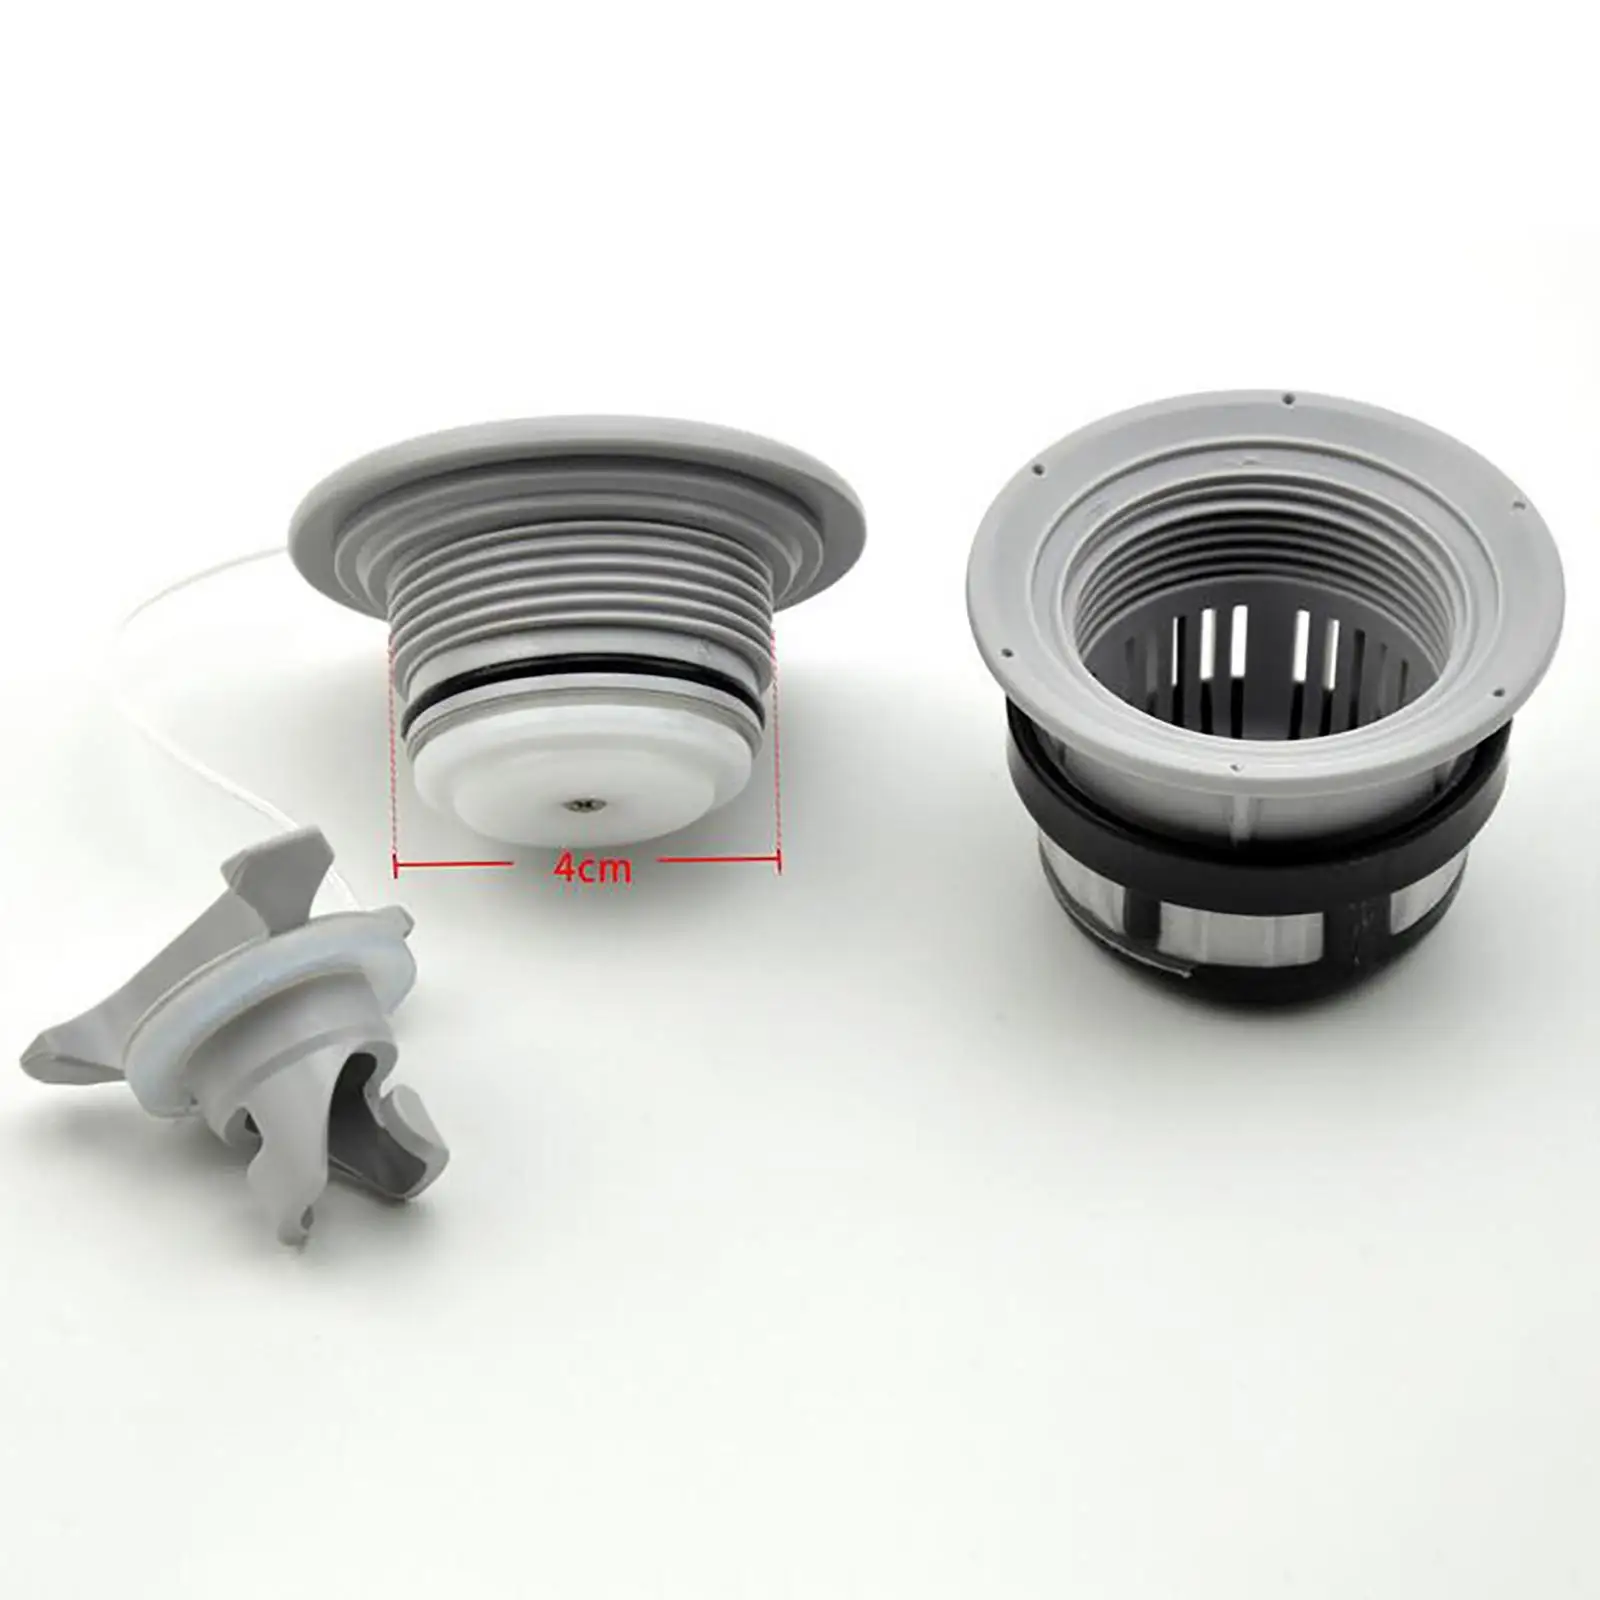 Boat Air Valve Adapter Caps, 6 Groove Gray Air Gas Valve Caps Air Plugs for Inflatable Boat Airbed Boat Raft Canoe Parts